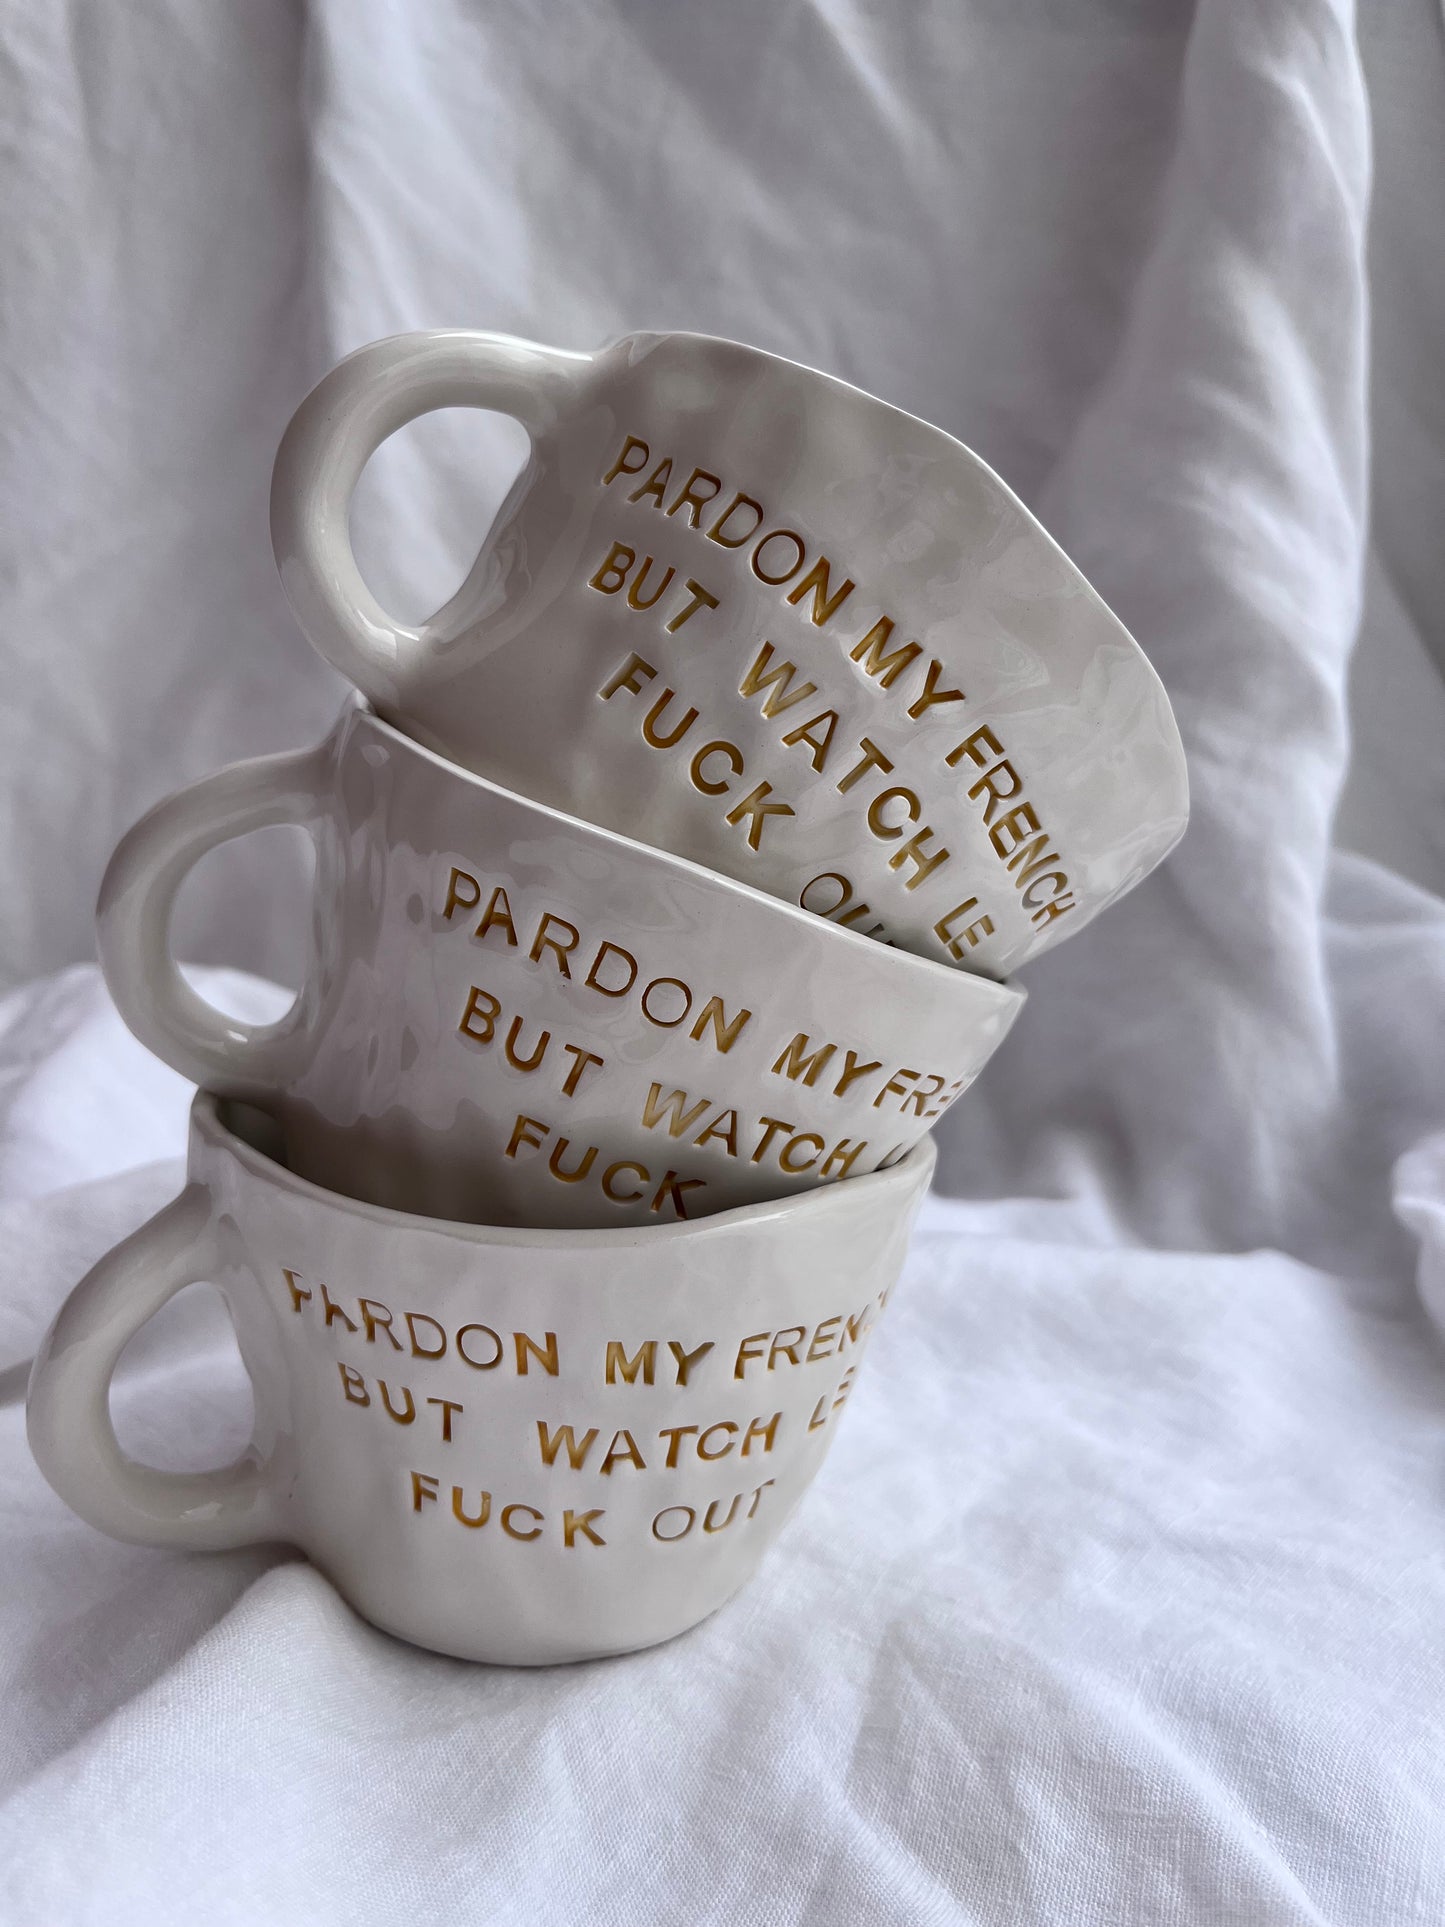 Mug “ Pardon my french, but watch le fuck out”